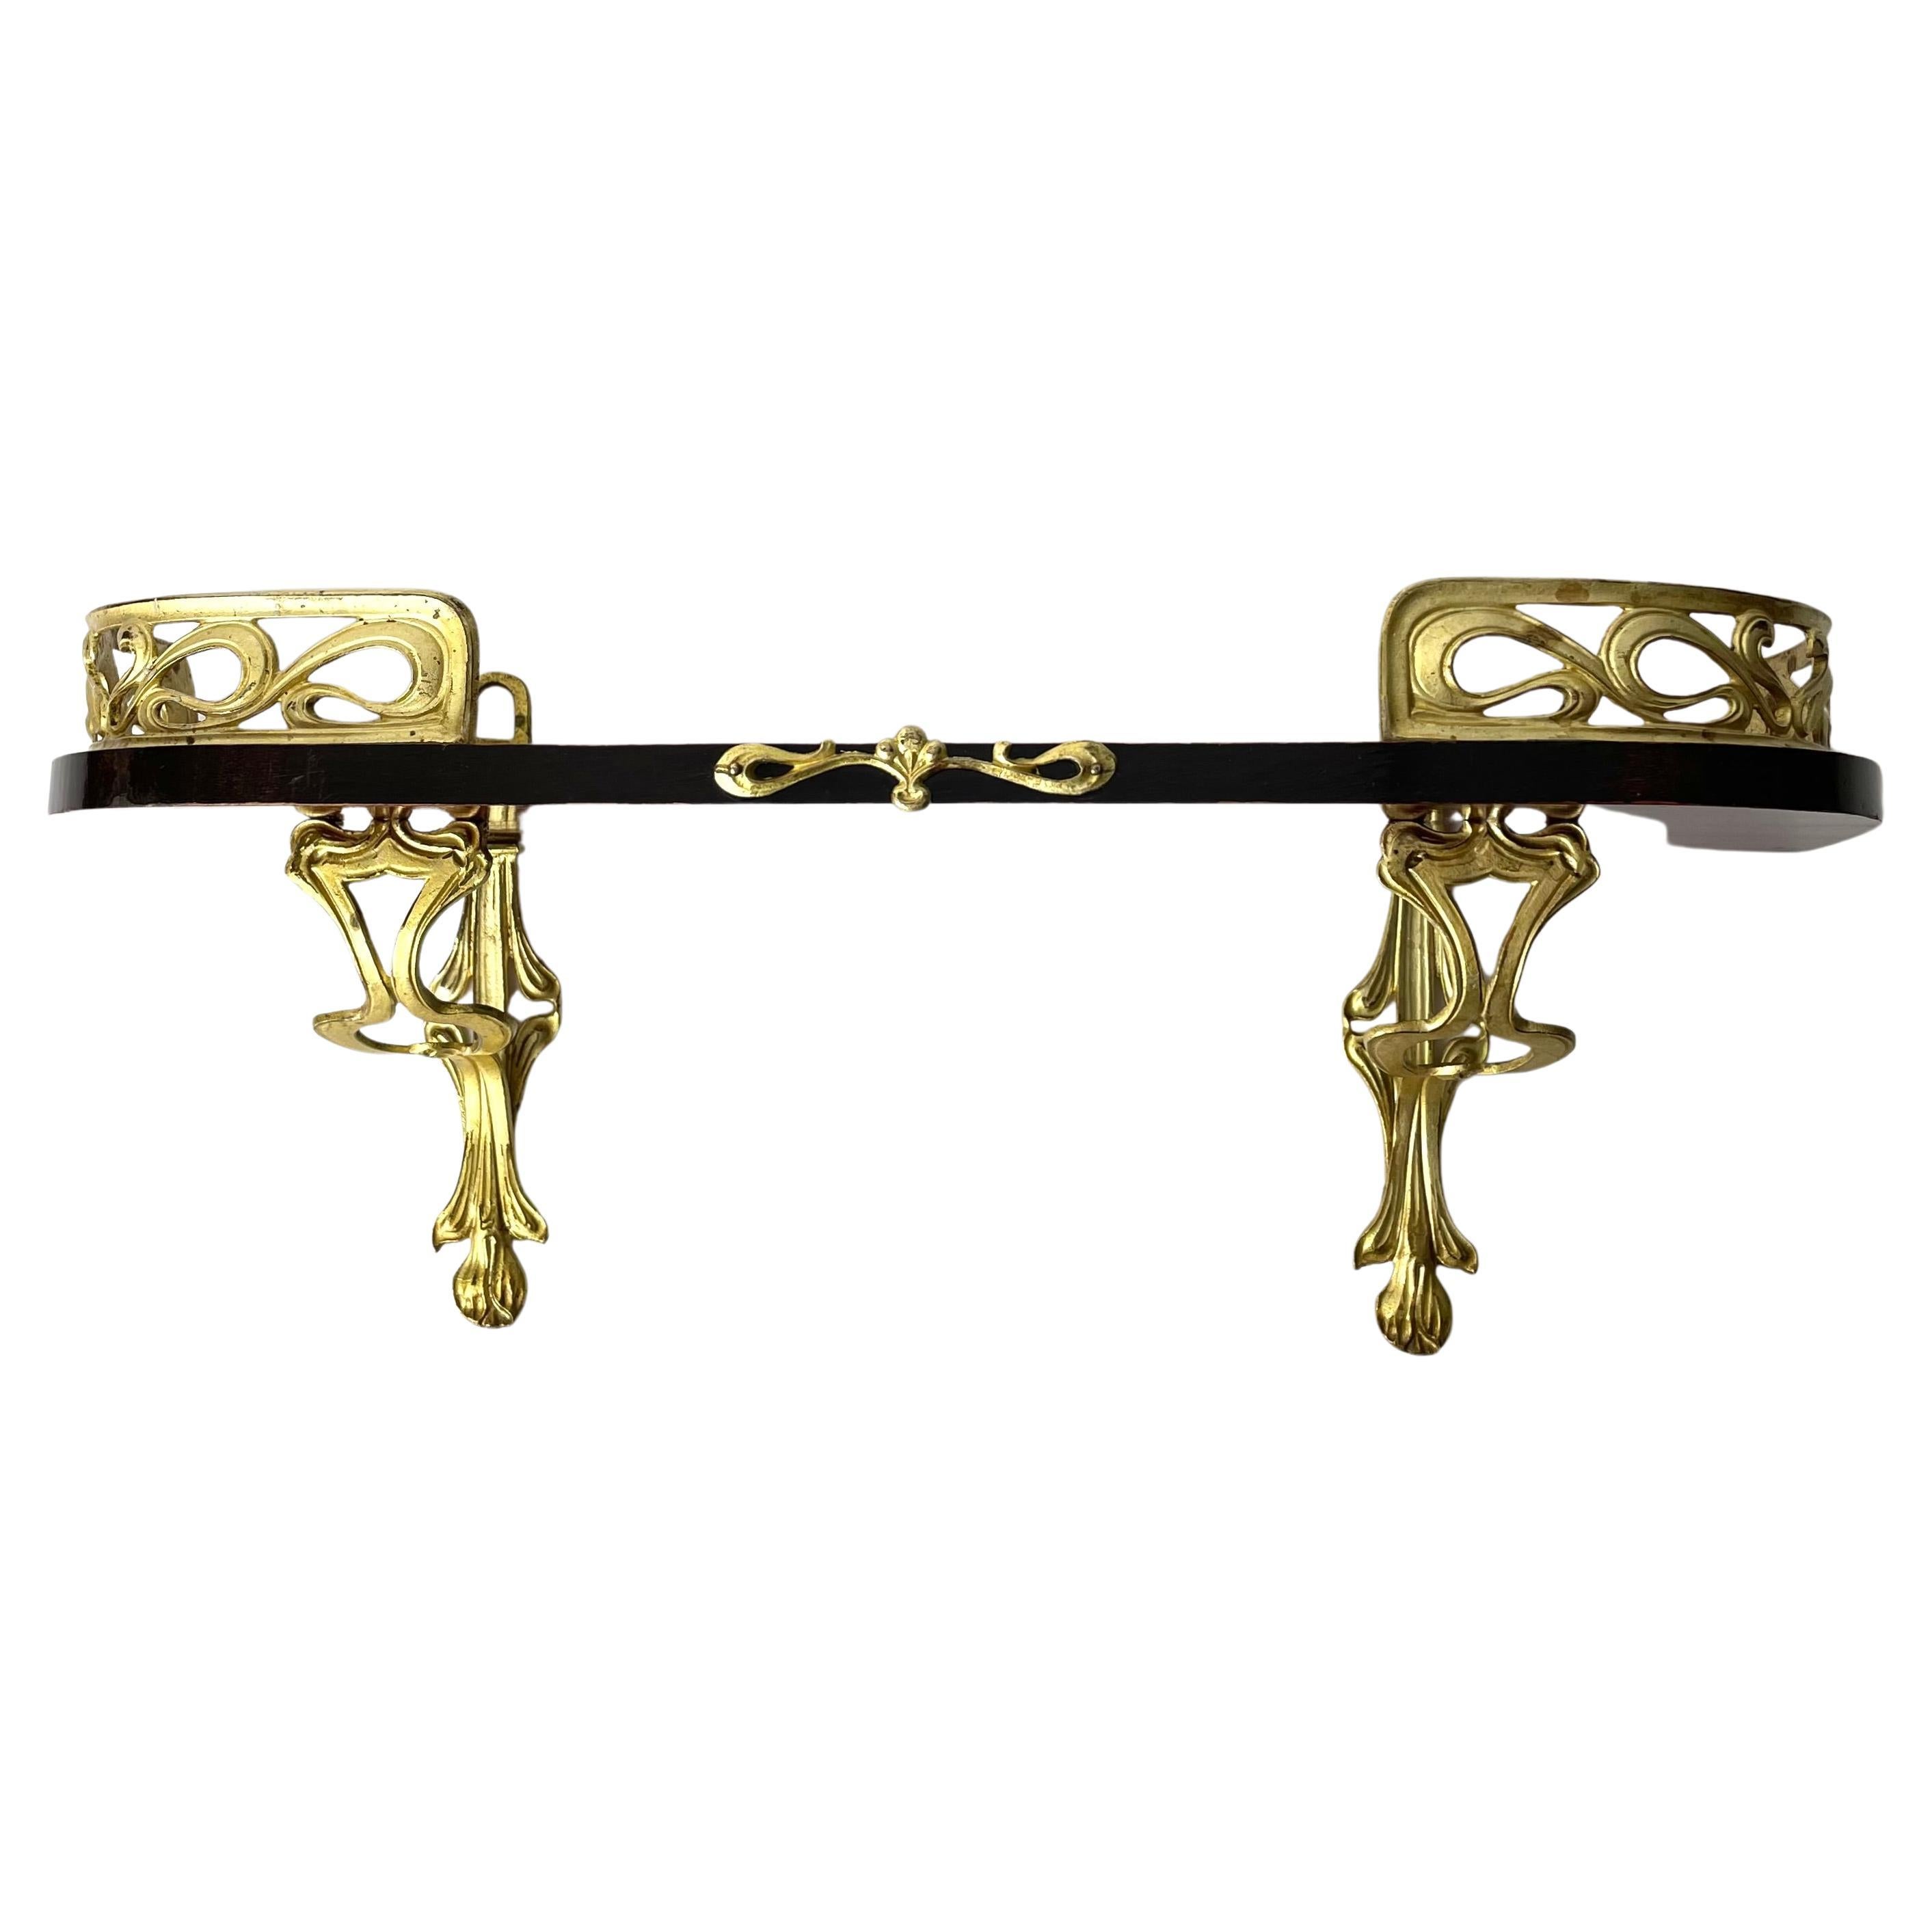 A small Wall Shelf with gilded decorations. Art Nouveau, early 20th Century